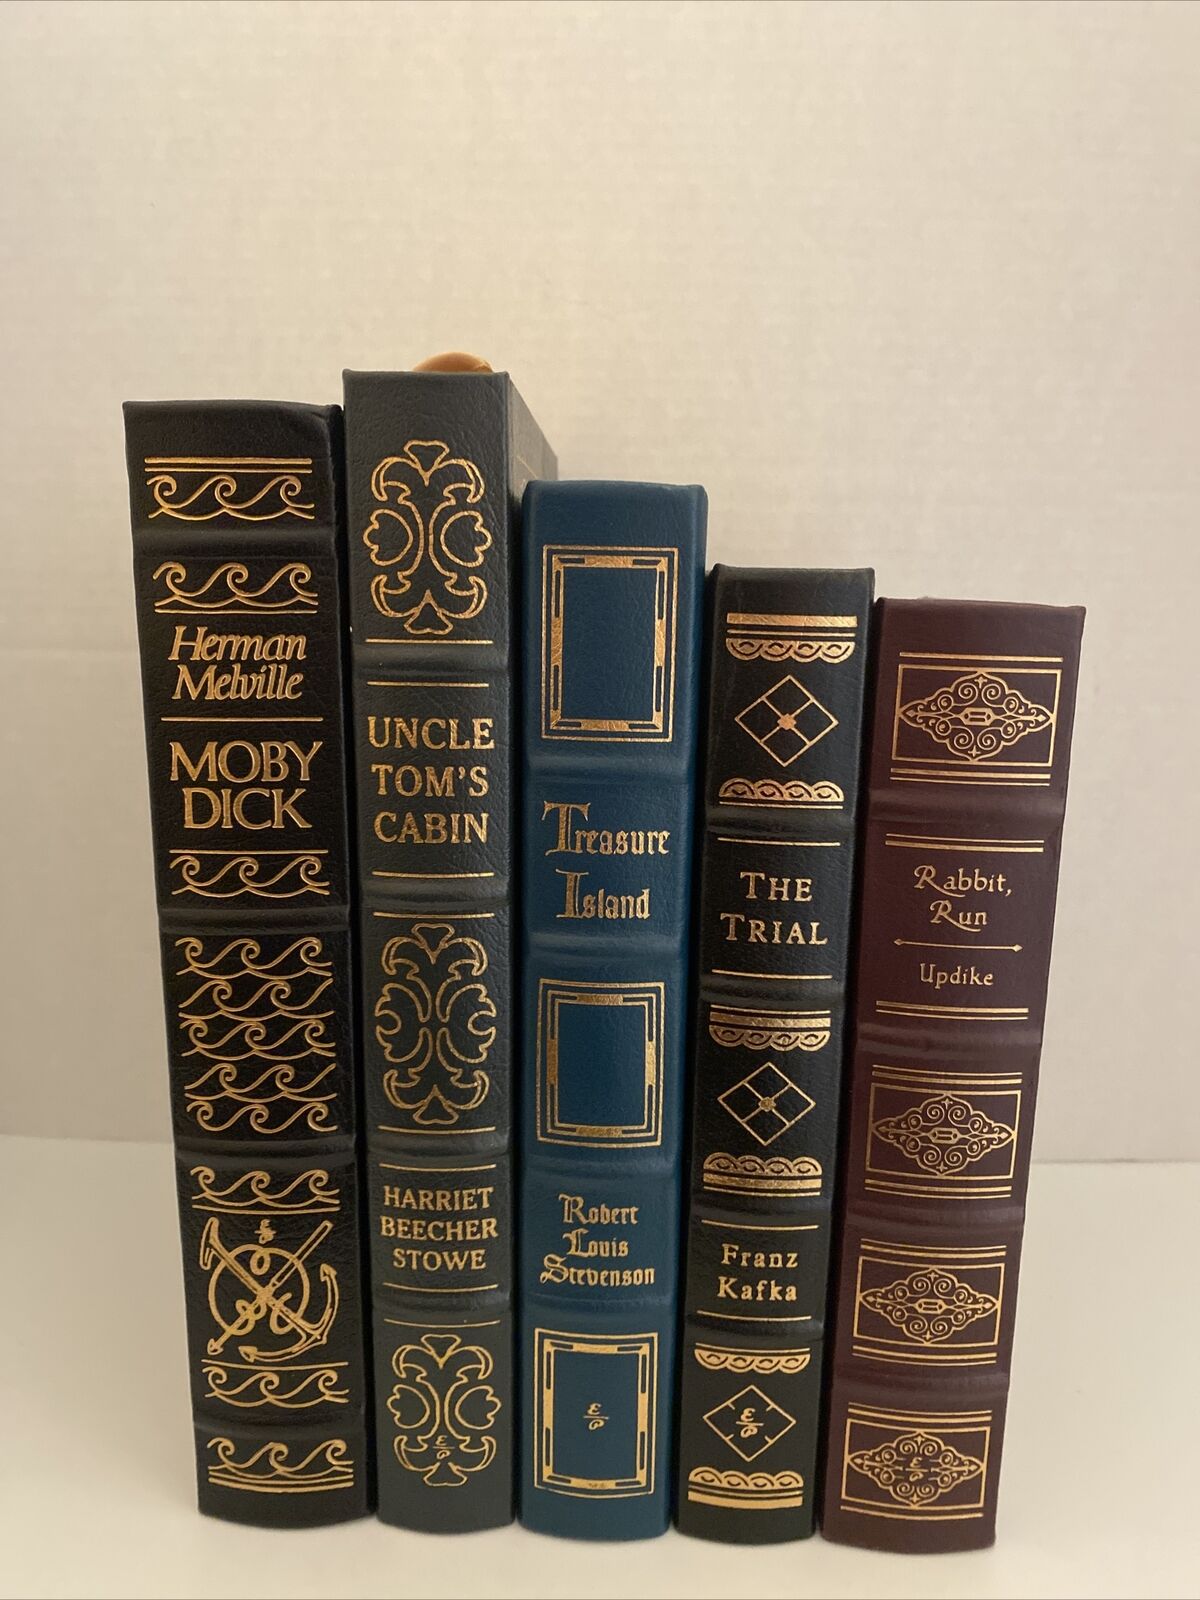 Lot of 5 Easton Press Collector Leather Bound Books -The Trial, Treasure Island, Без бренда